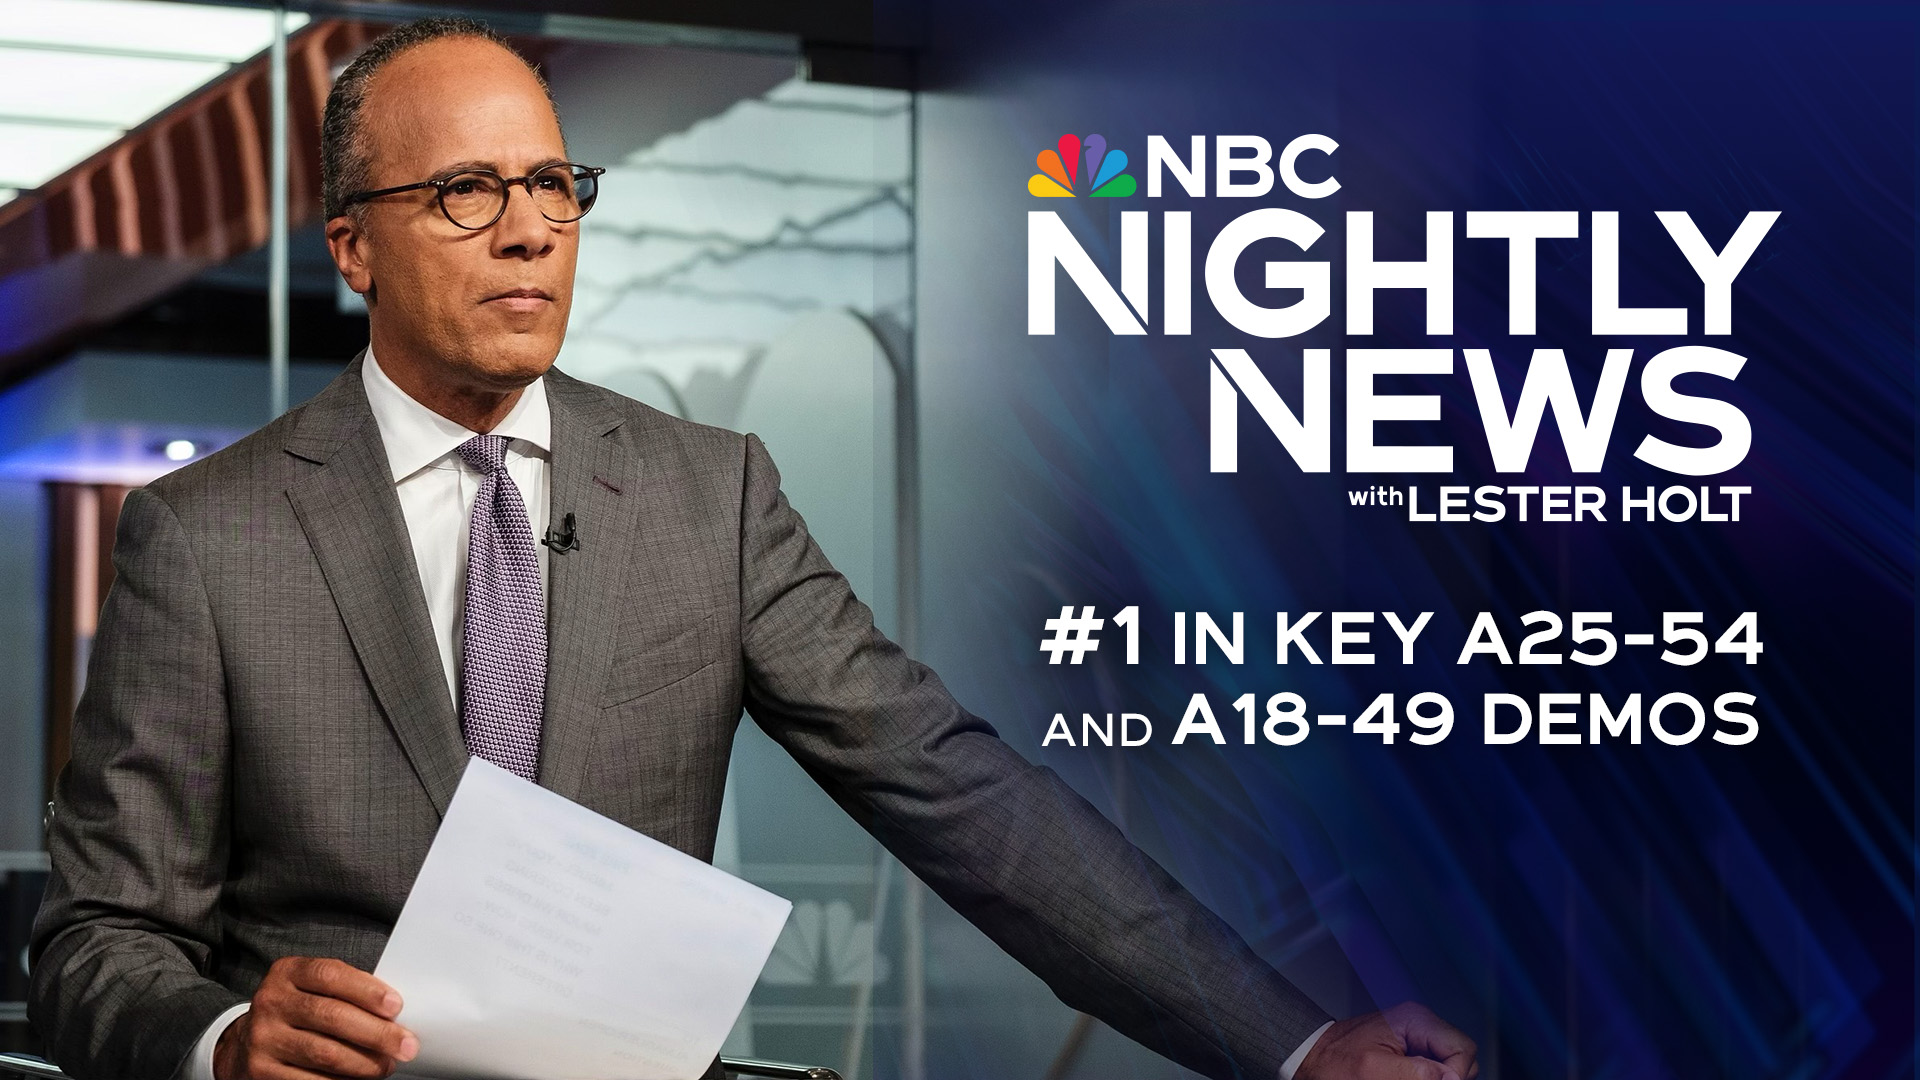 NBC NIGHTLY NEWS WITH LESTER HOLT IS THE #1 EVENING NEWSCAST IN BOTH KEY A25-54 & A18-49 DEMOS